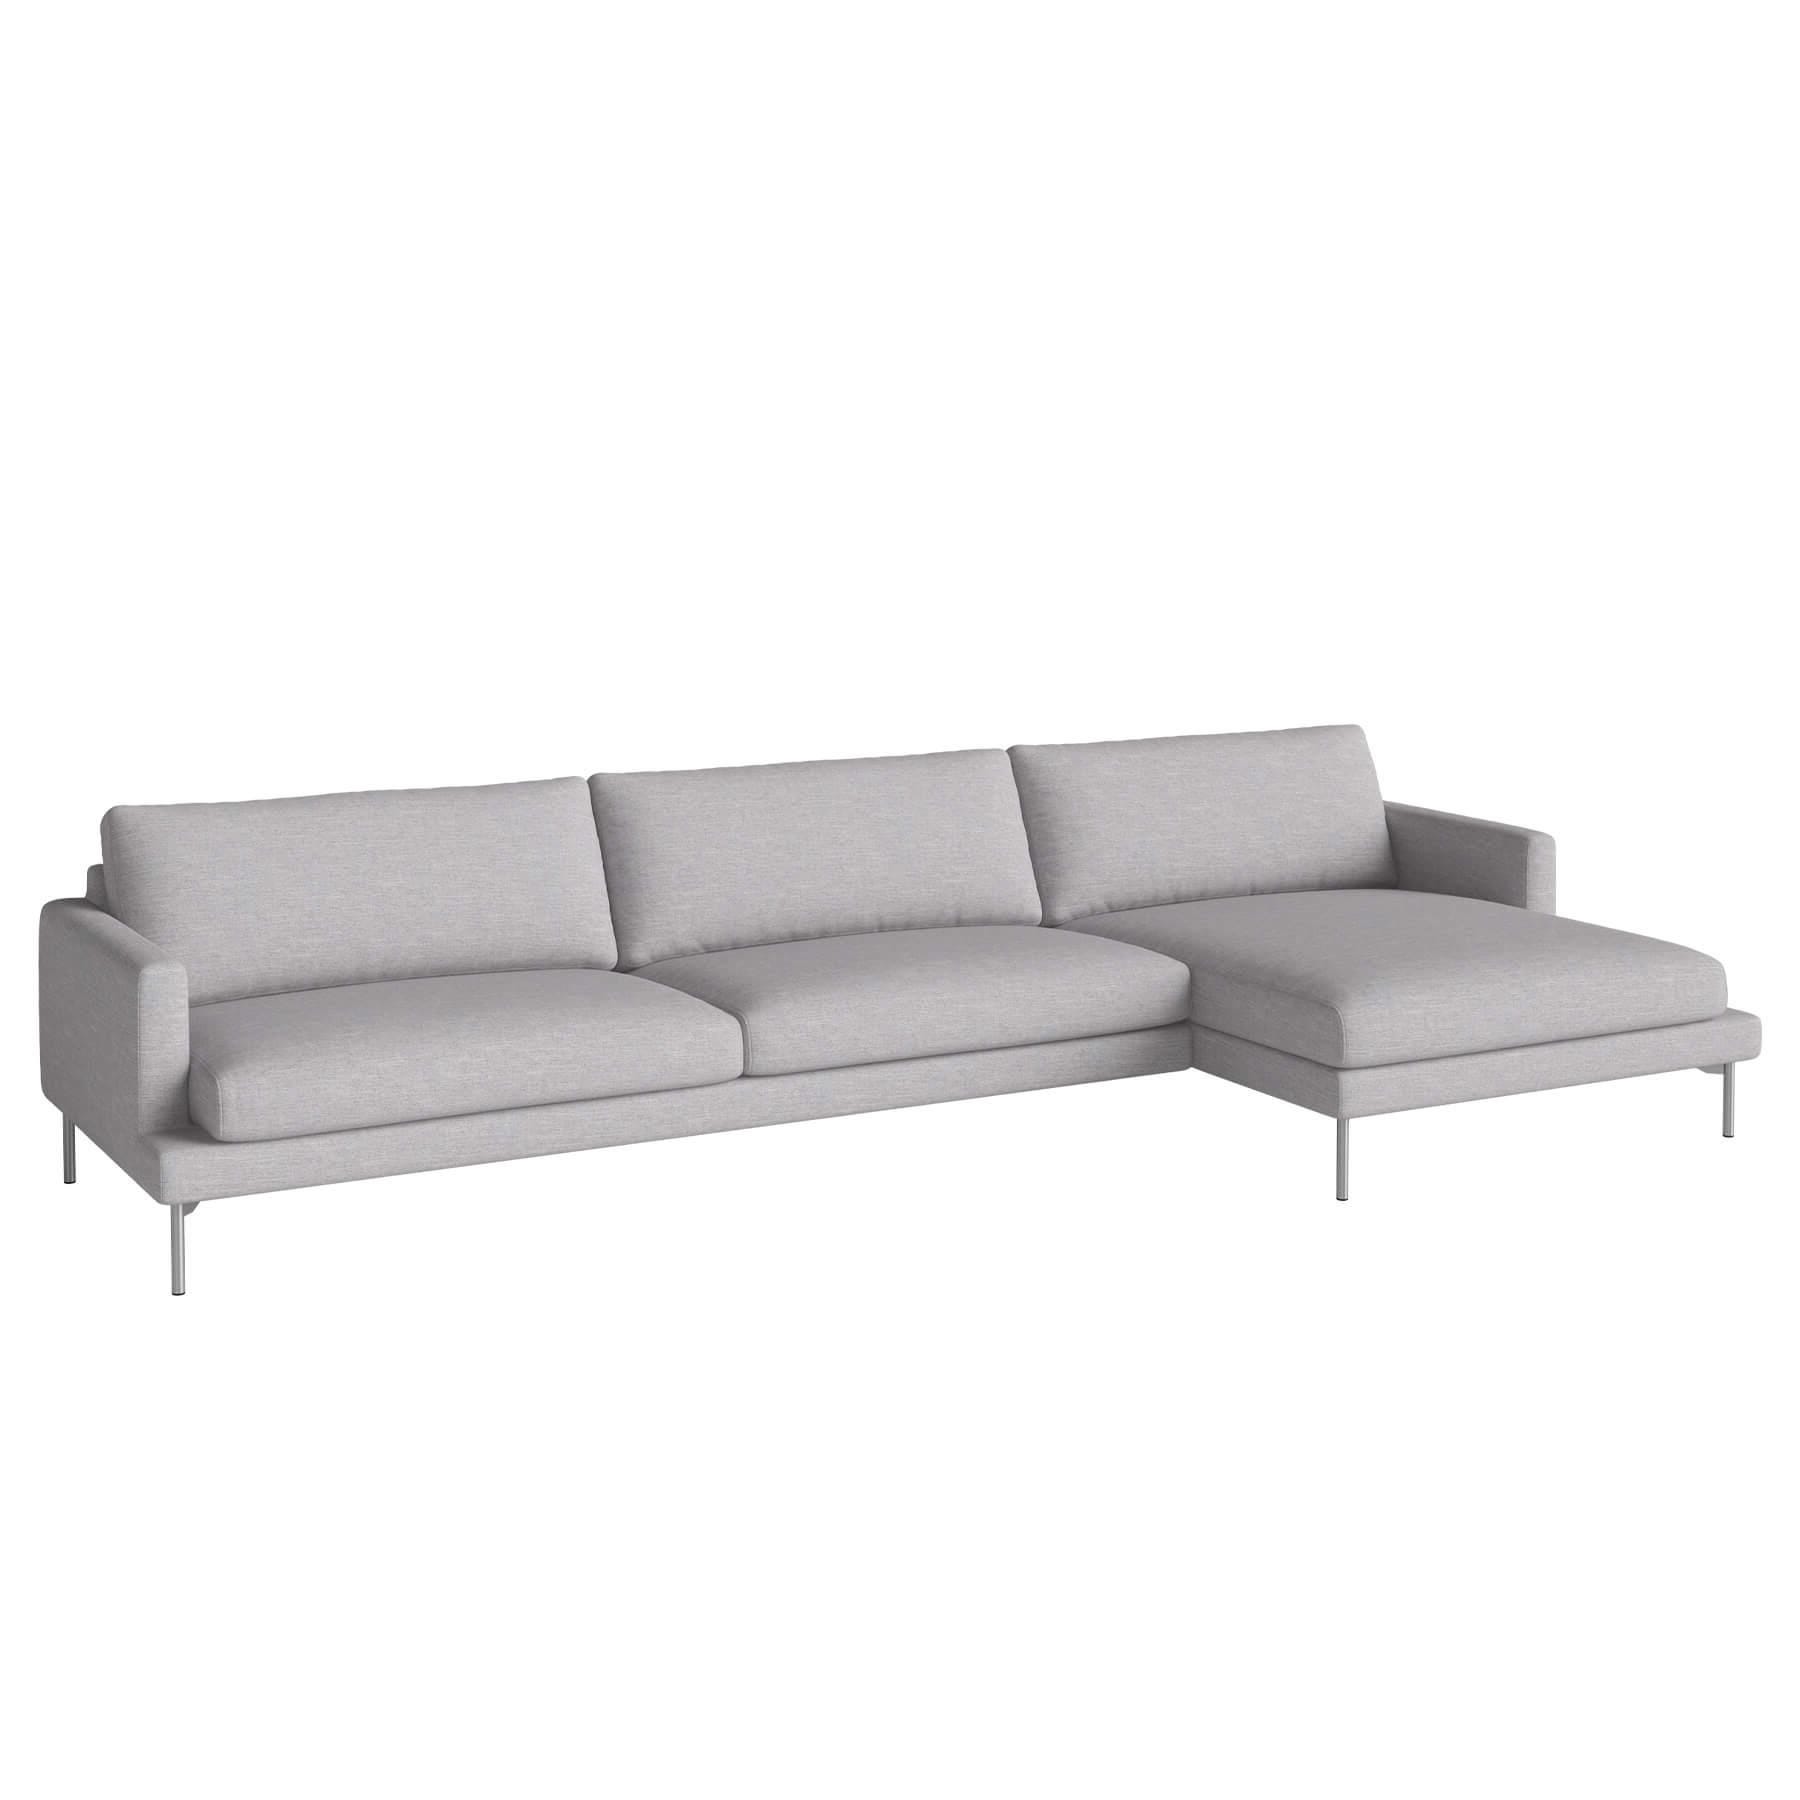 Bolia Veneda Sofa 45 Seater Sofa With Chaise Longue Brushed Steel Baize Light Grey Right Grey Designer Furniture From Holloways Of Ludlow